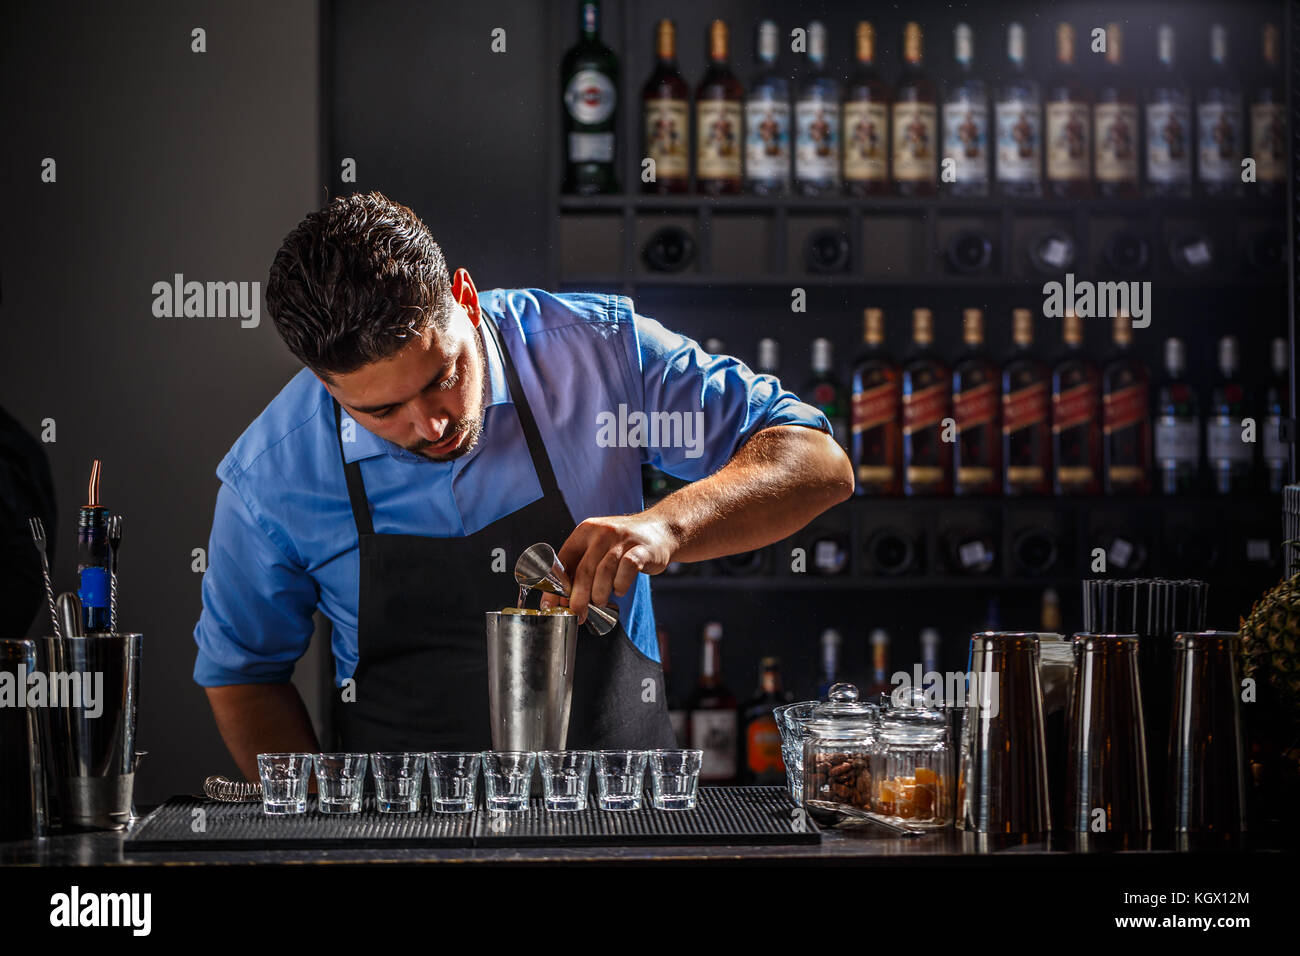 Bartender with jigger pouring alcohol into shaker and preparing cocktail at bar counter Stock Photo